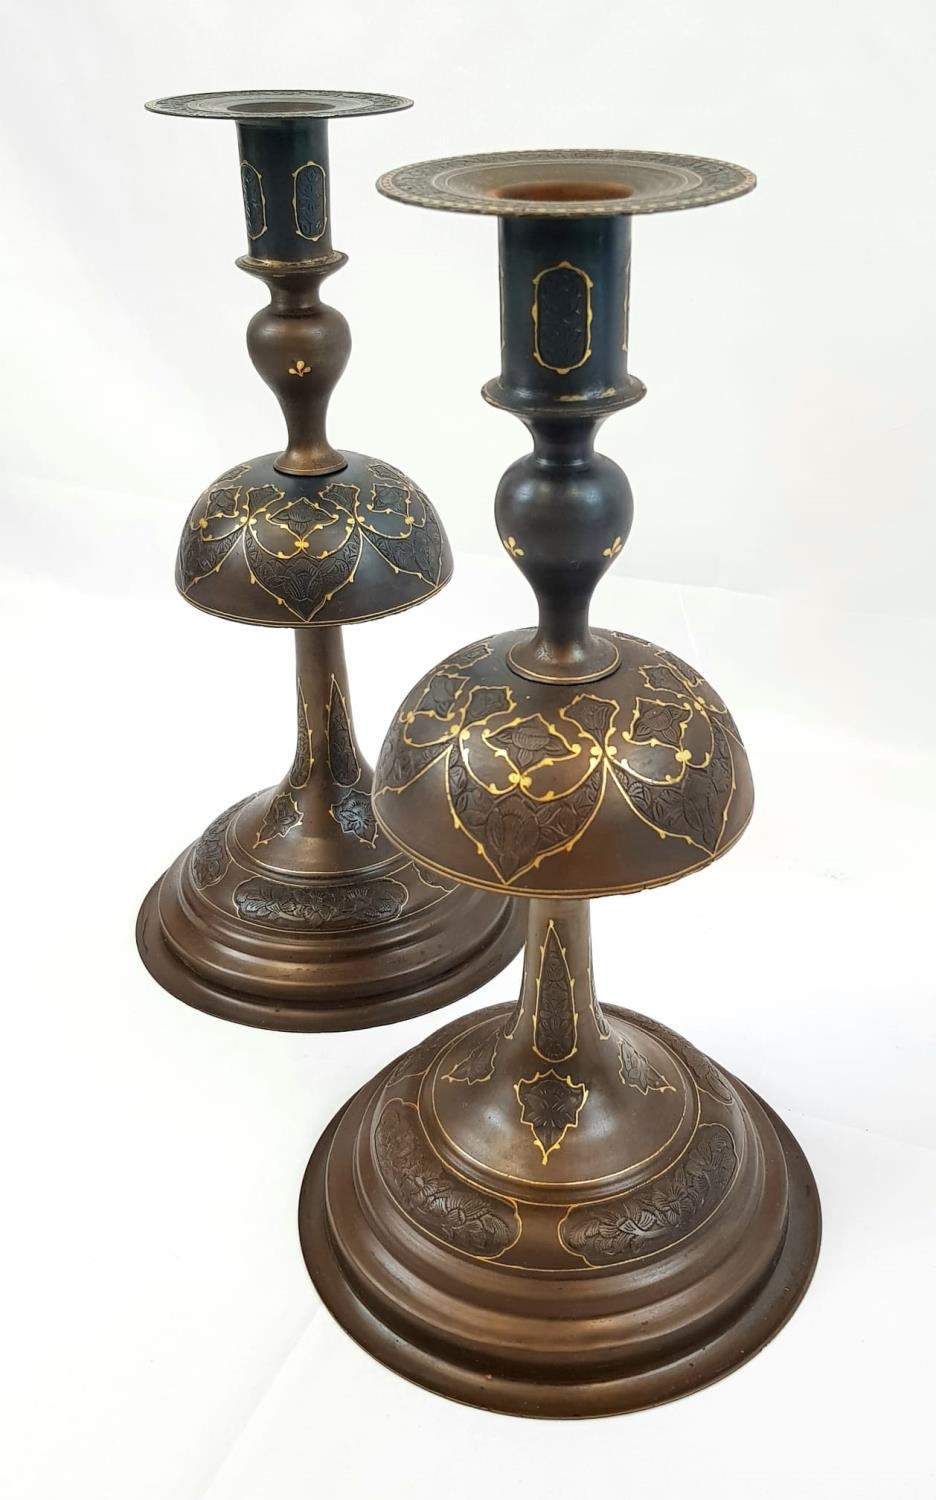 UNUSUAL PAIR OF STILL CANDLESTICKS WITH GOLD INLAY THOUGHT TO BE OF PERSIAN ORIGIN, STANDING 35 CM - Image 2 of 3